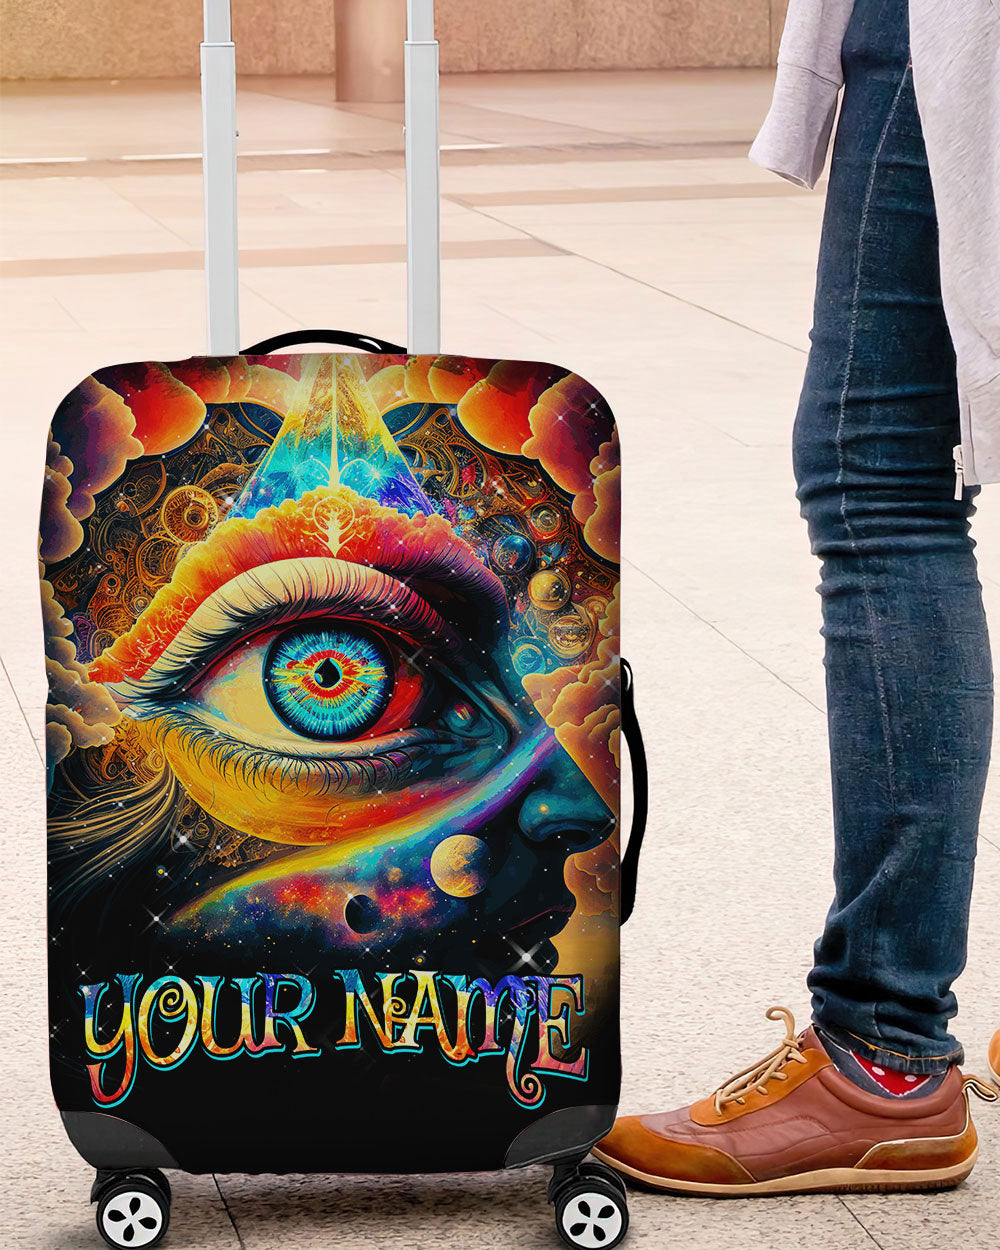 PERSONALIZED THE EYES ARE USELESS WHEN THE MIND IS BLIND LUGGAGE COVER - TYTM2103235